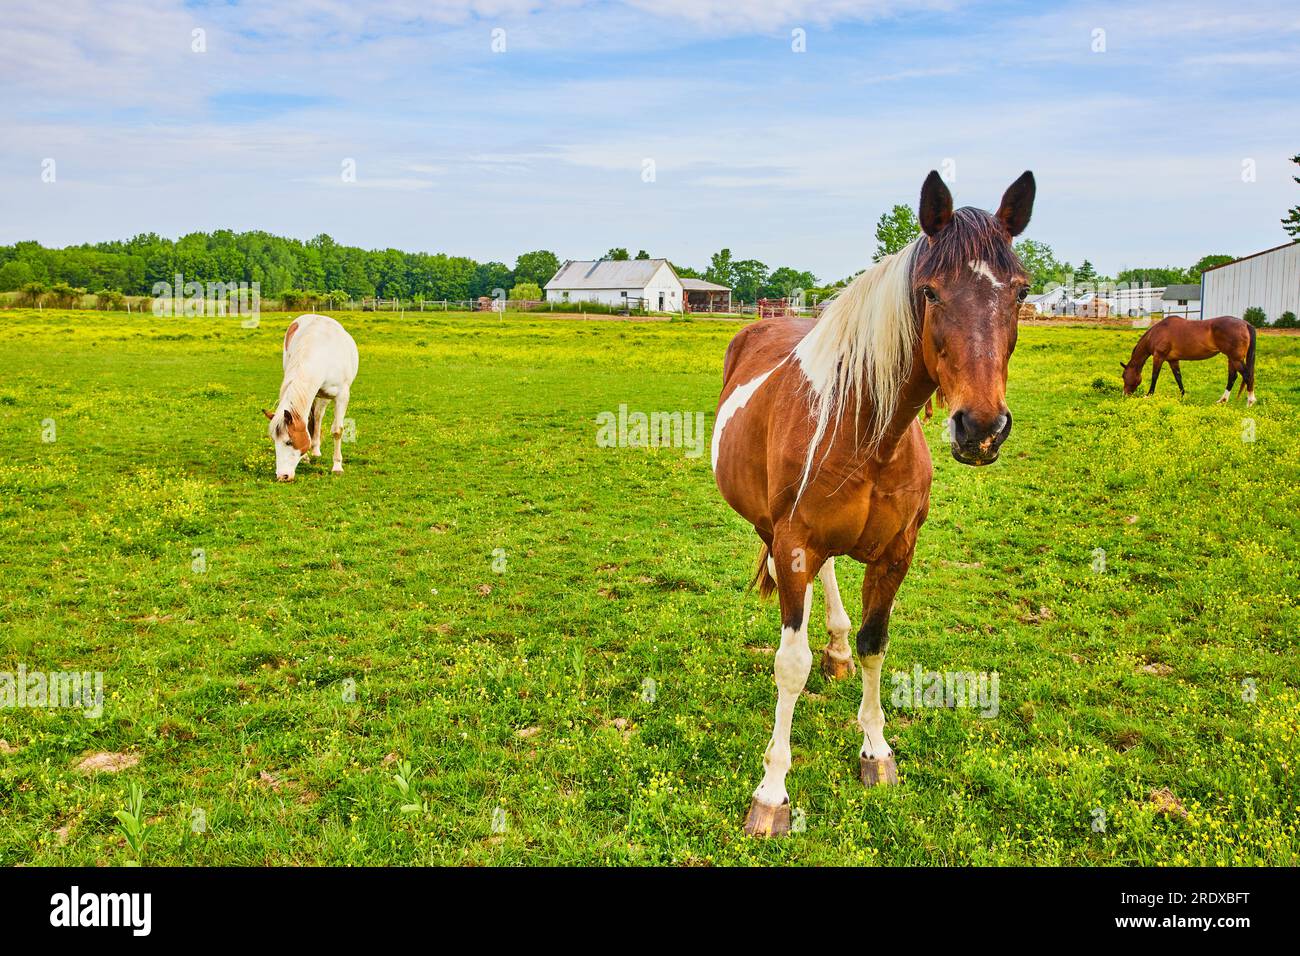 Three horses in grassy enclosure with grass and yellow primrose flowers Stock Photo